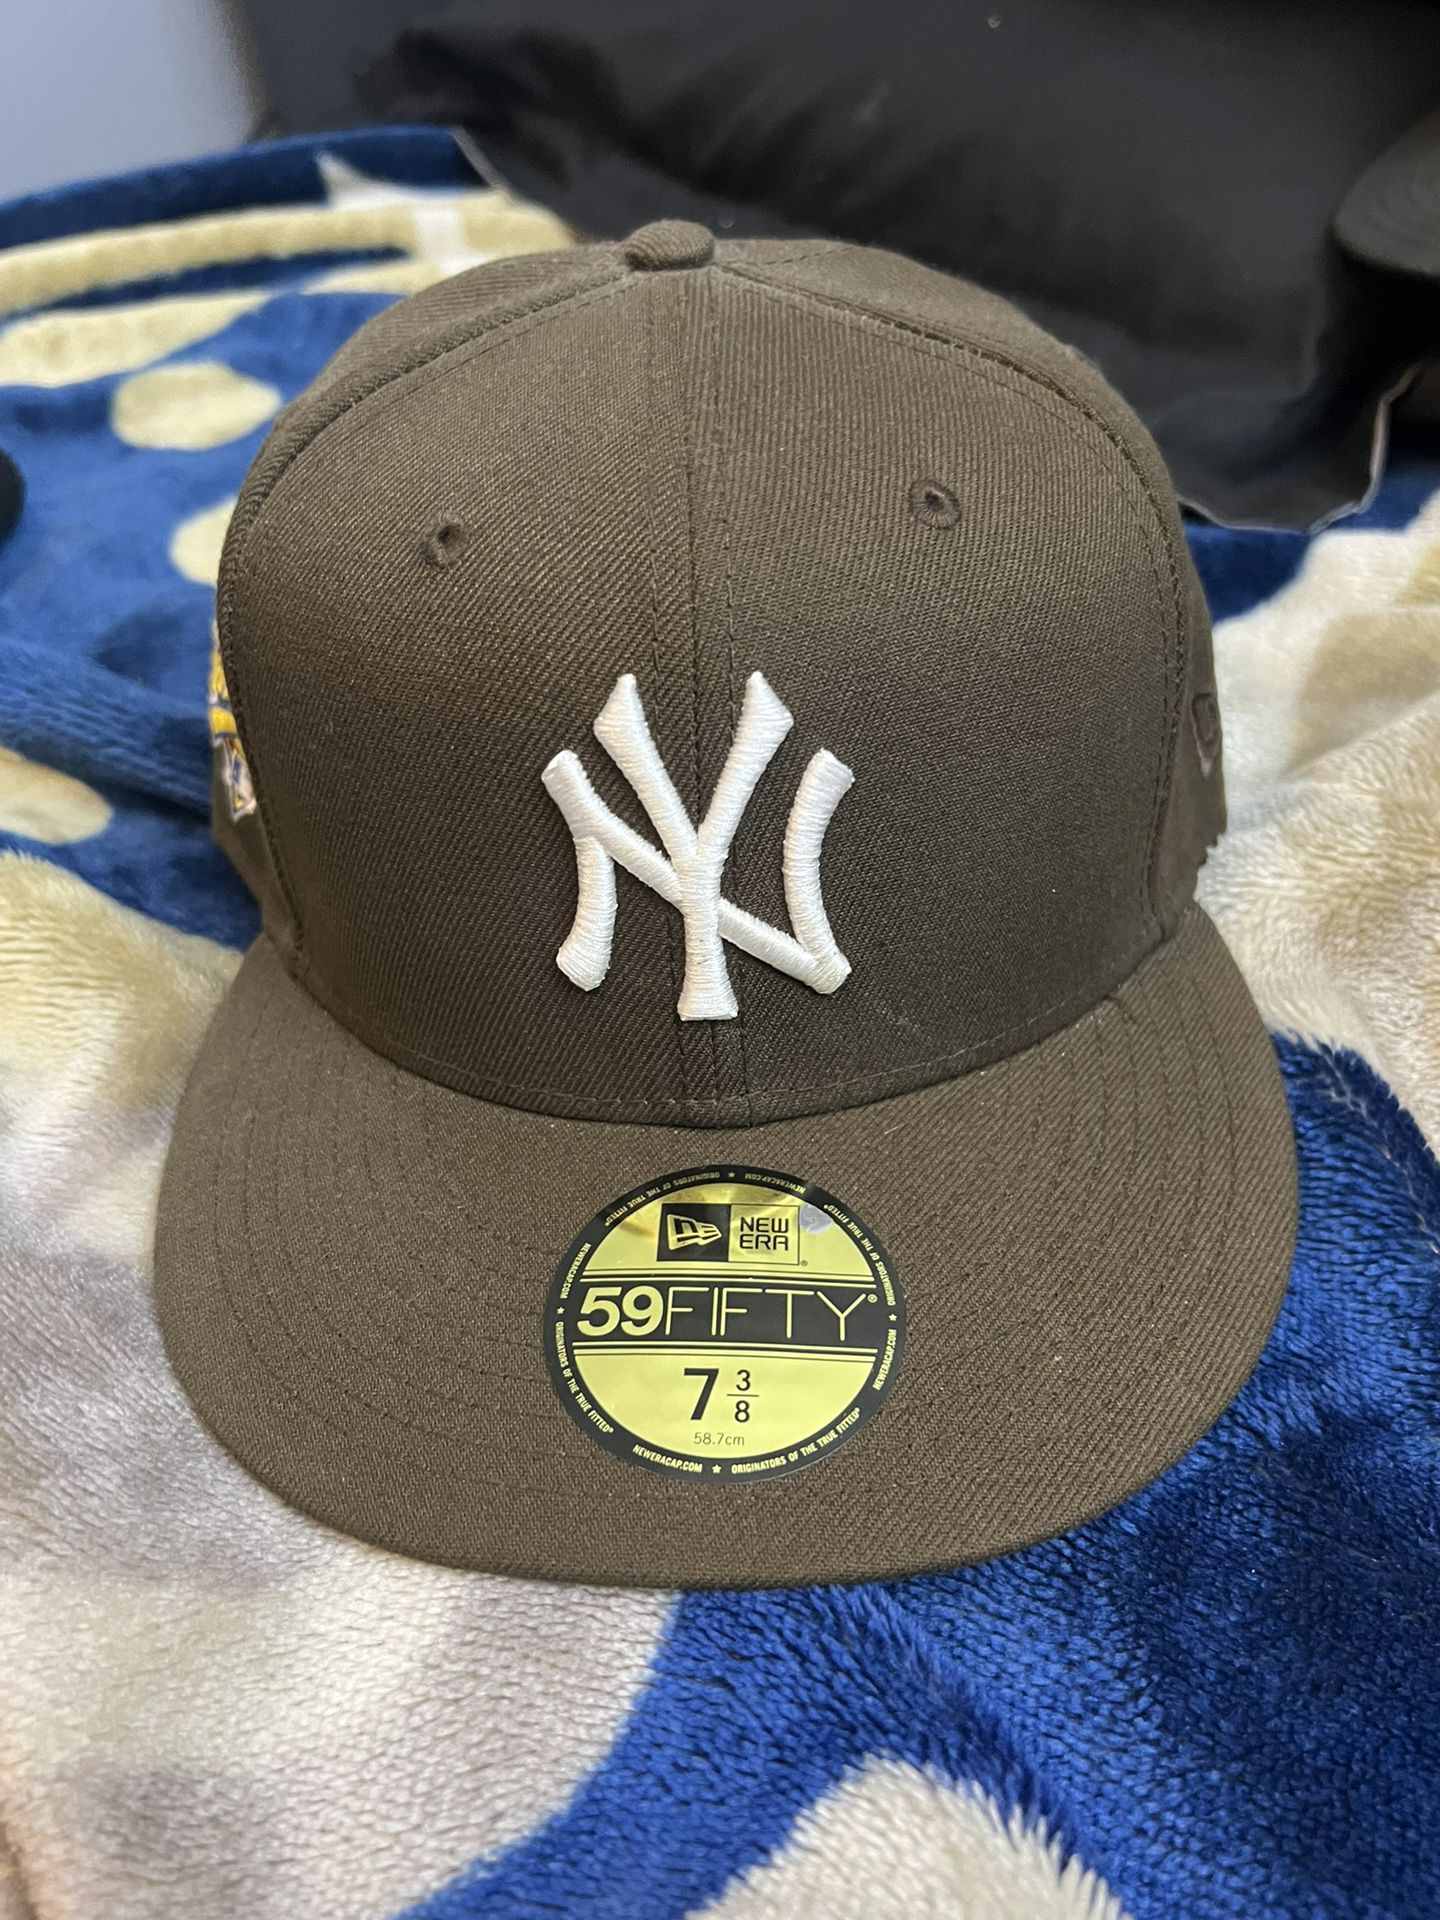 NY Brown/pink Fitted Hat, Size 7 3/8 for Sale in Pico Rivera, CA - OfferUp